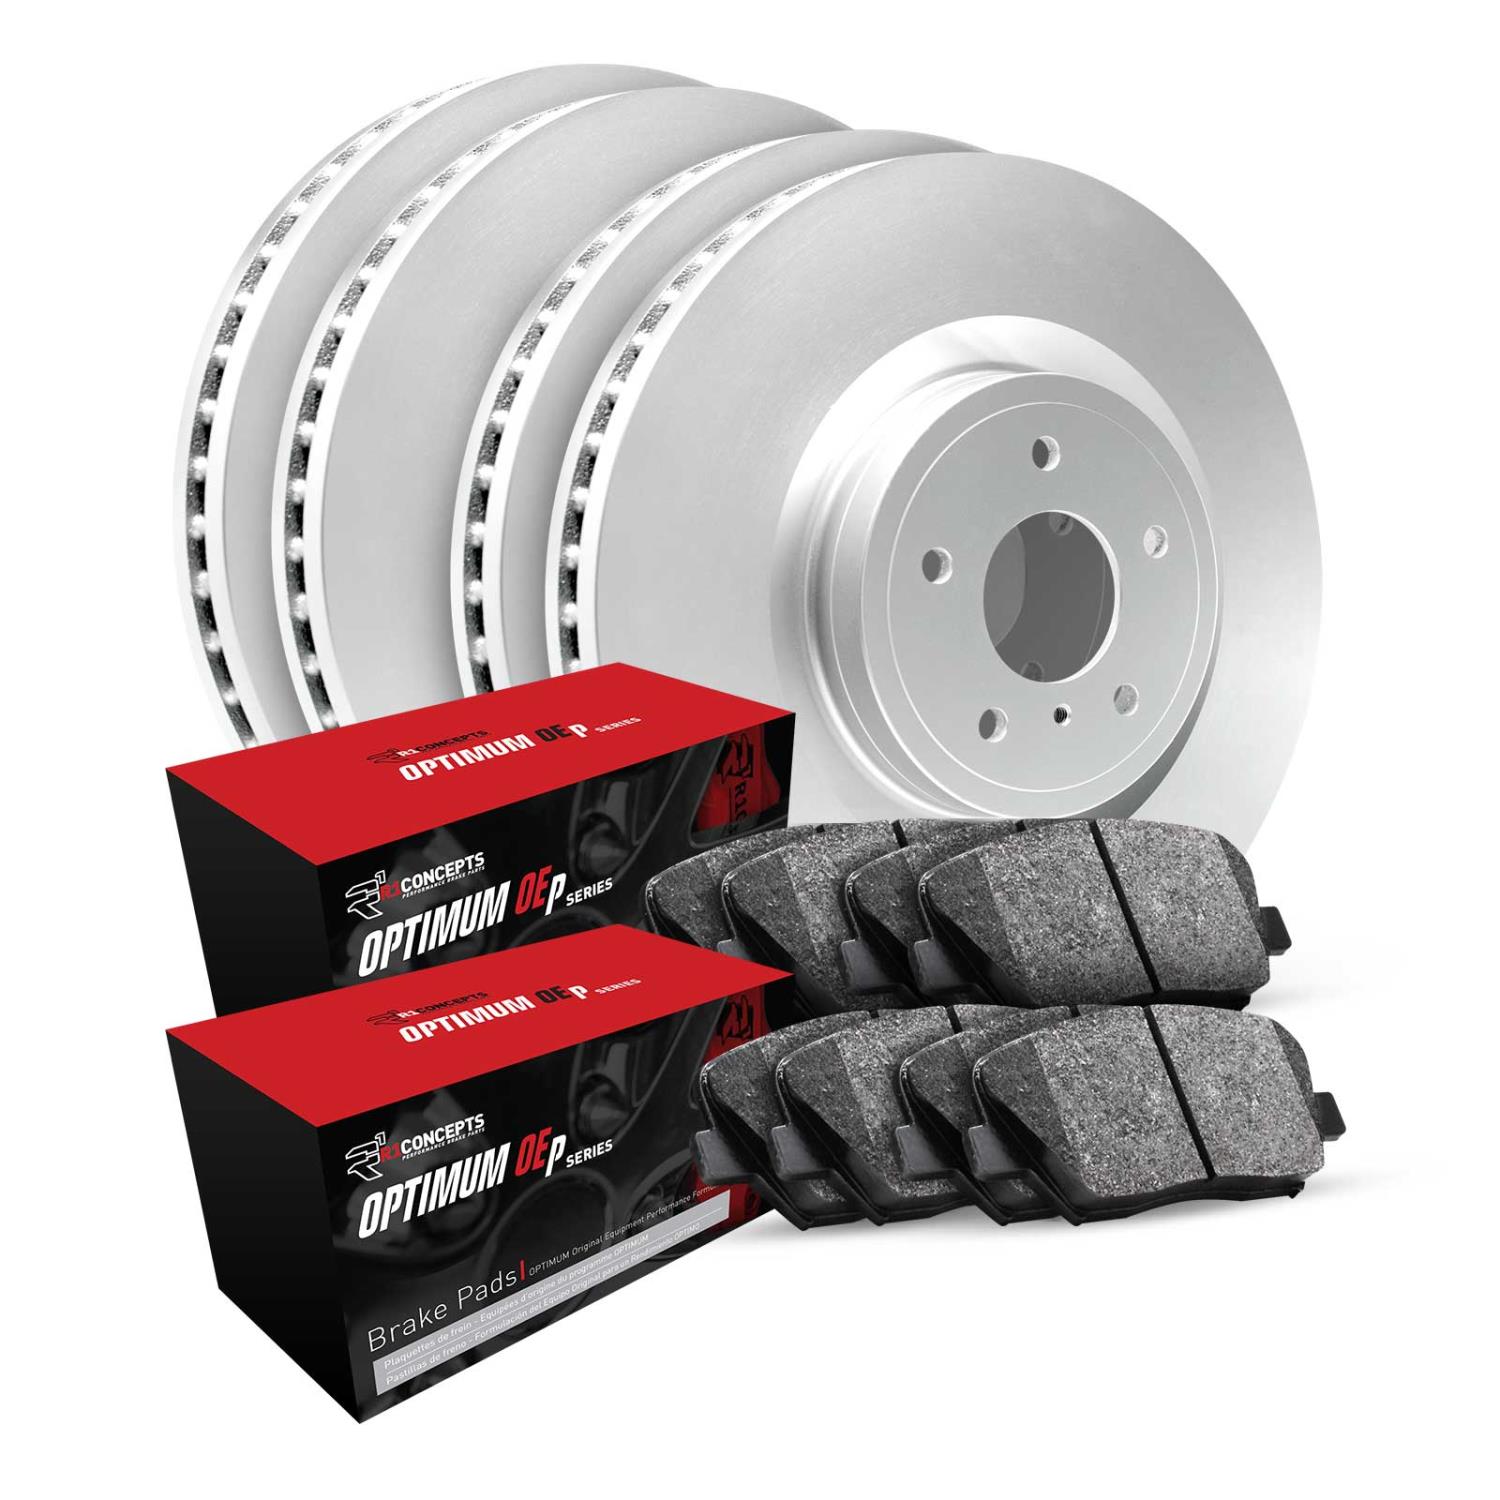 GEO-Carbon Brake Rotor Set w/Optimum OE Pads, 2012-2020 Fits Multiple Makes/Models, Position: Front & Rear